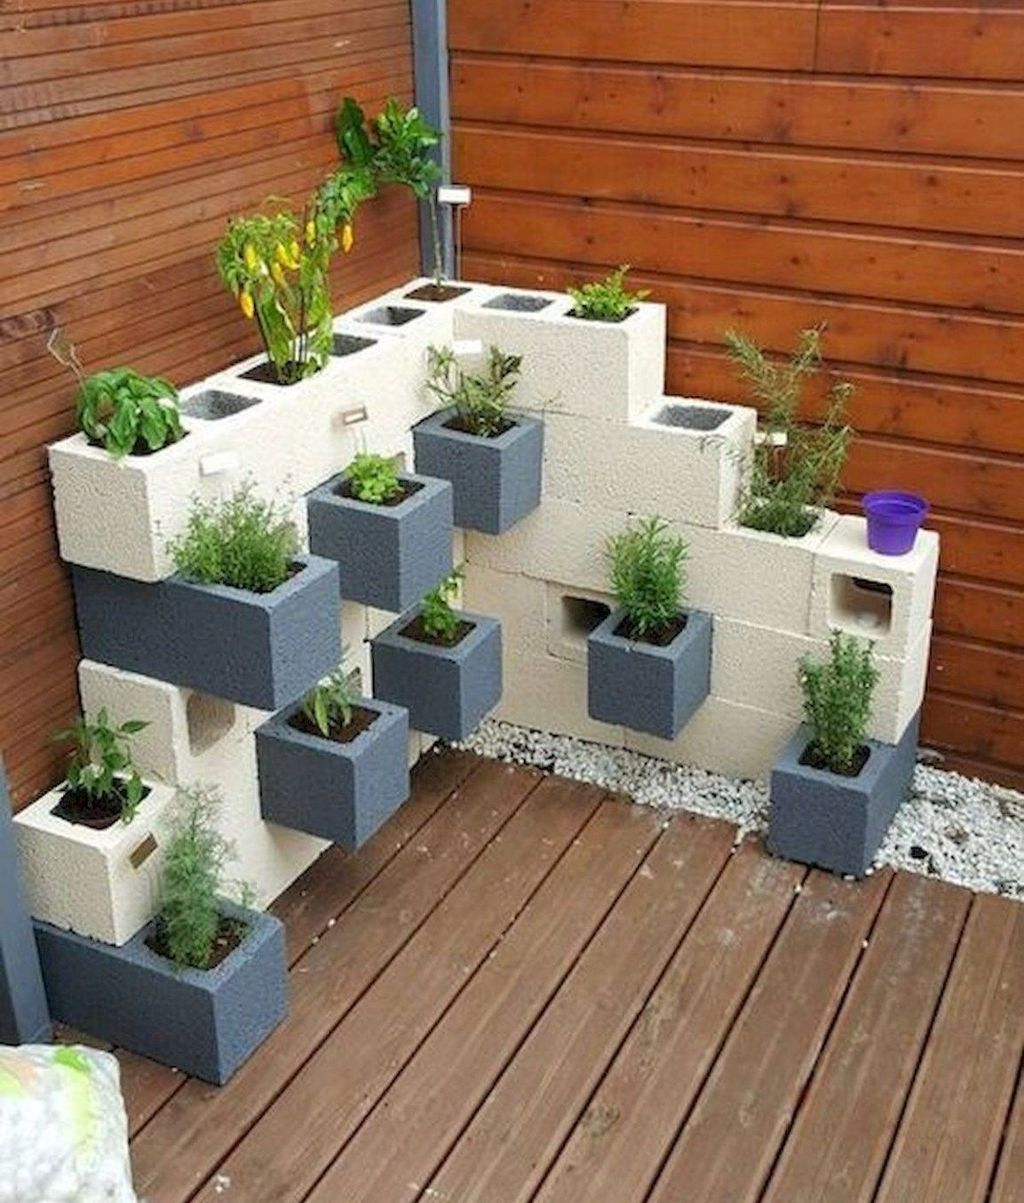 Stylish Garden Design Ideas With Cinder Block To Try 02